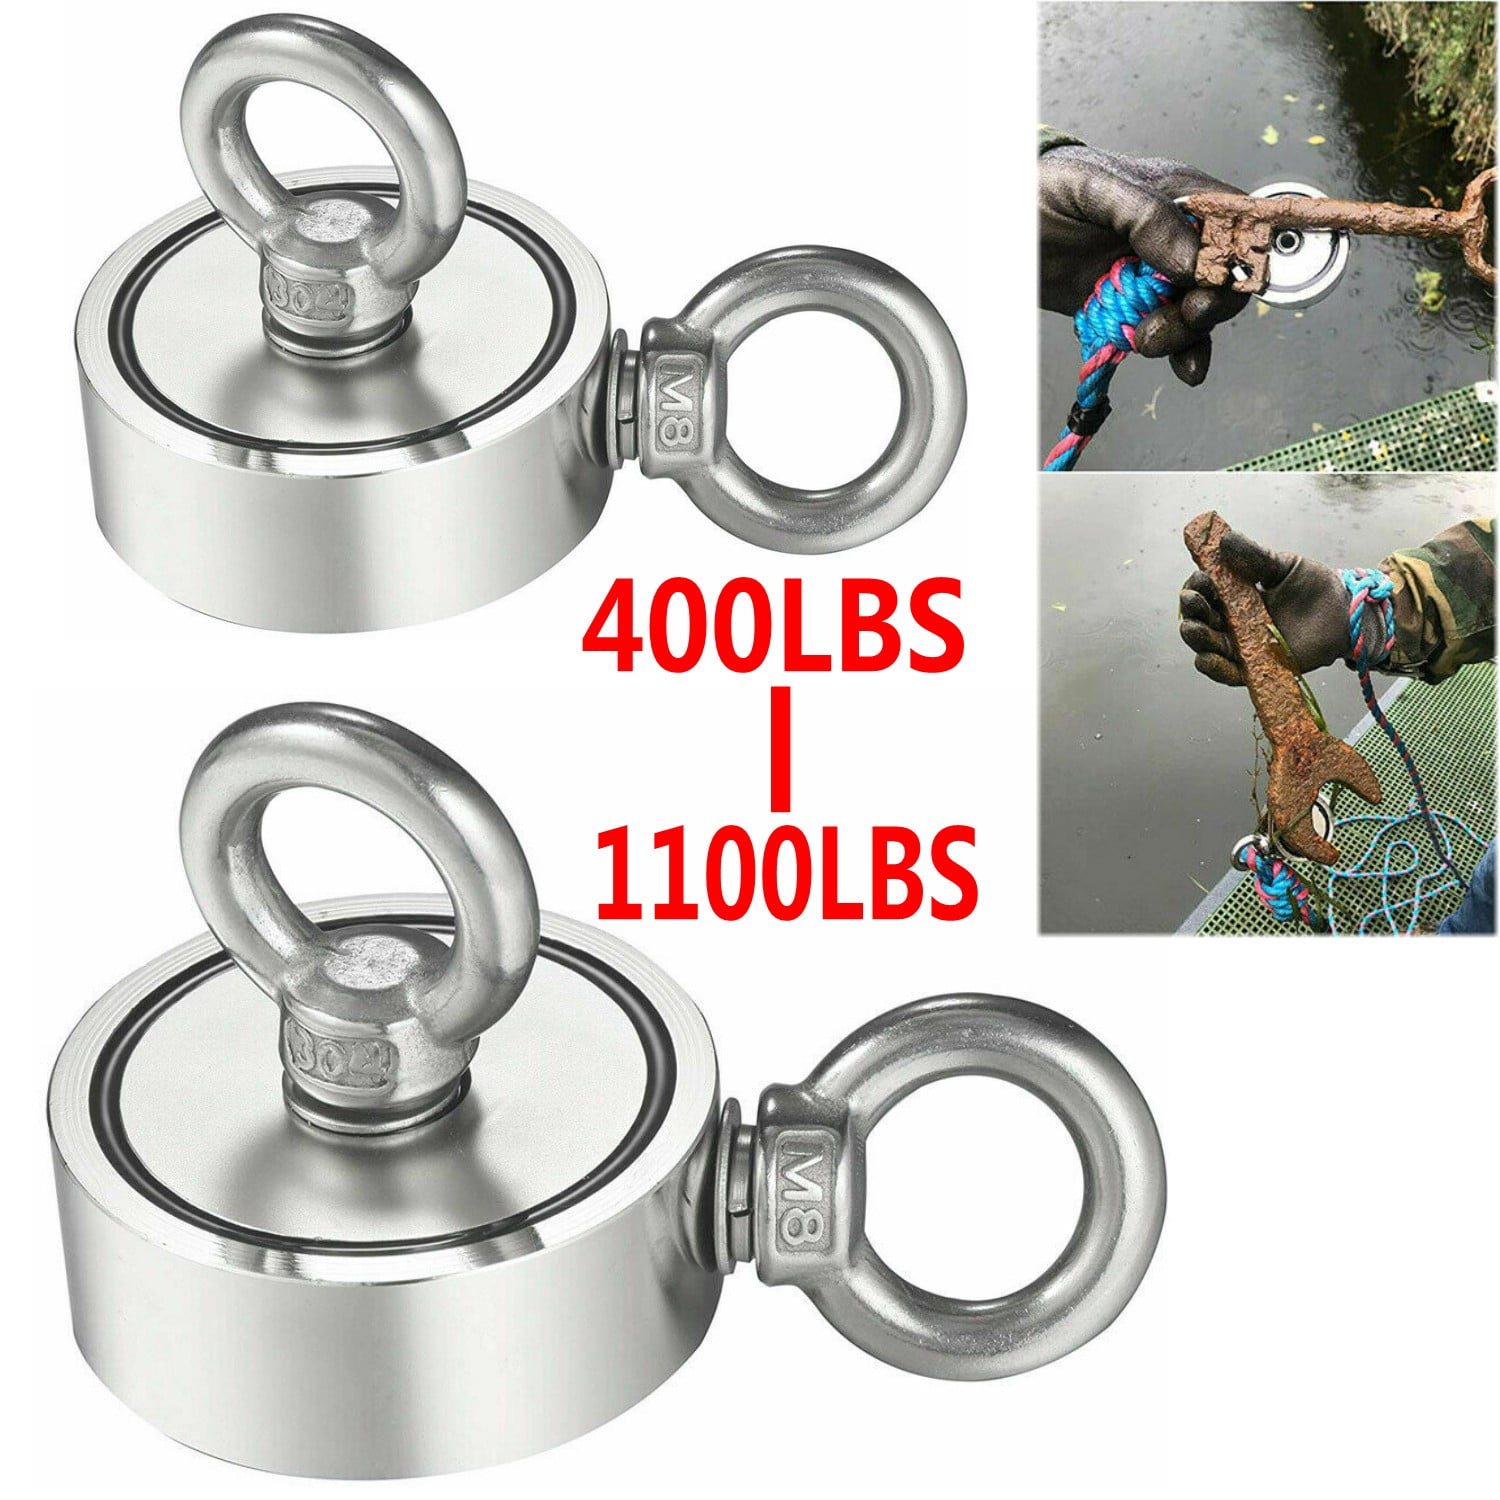 400BLS Pulling Force Neodymium Magnet Double-sided Salvage Fishing Magnet Hook 